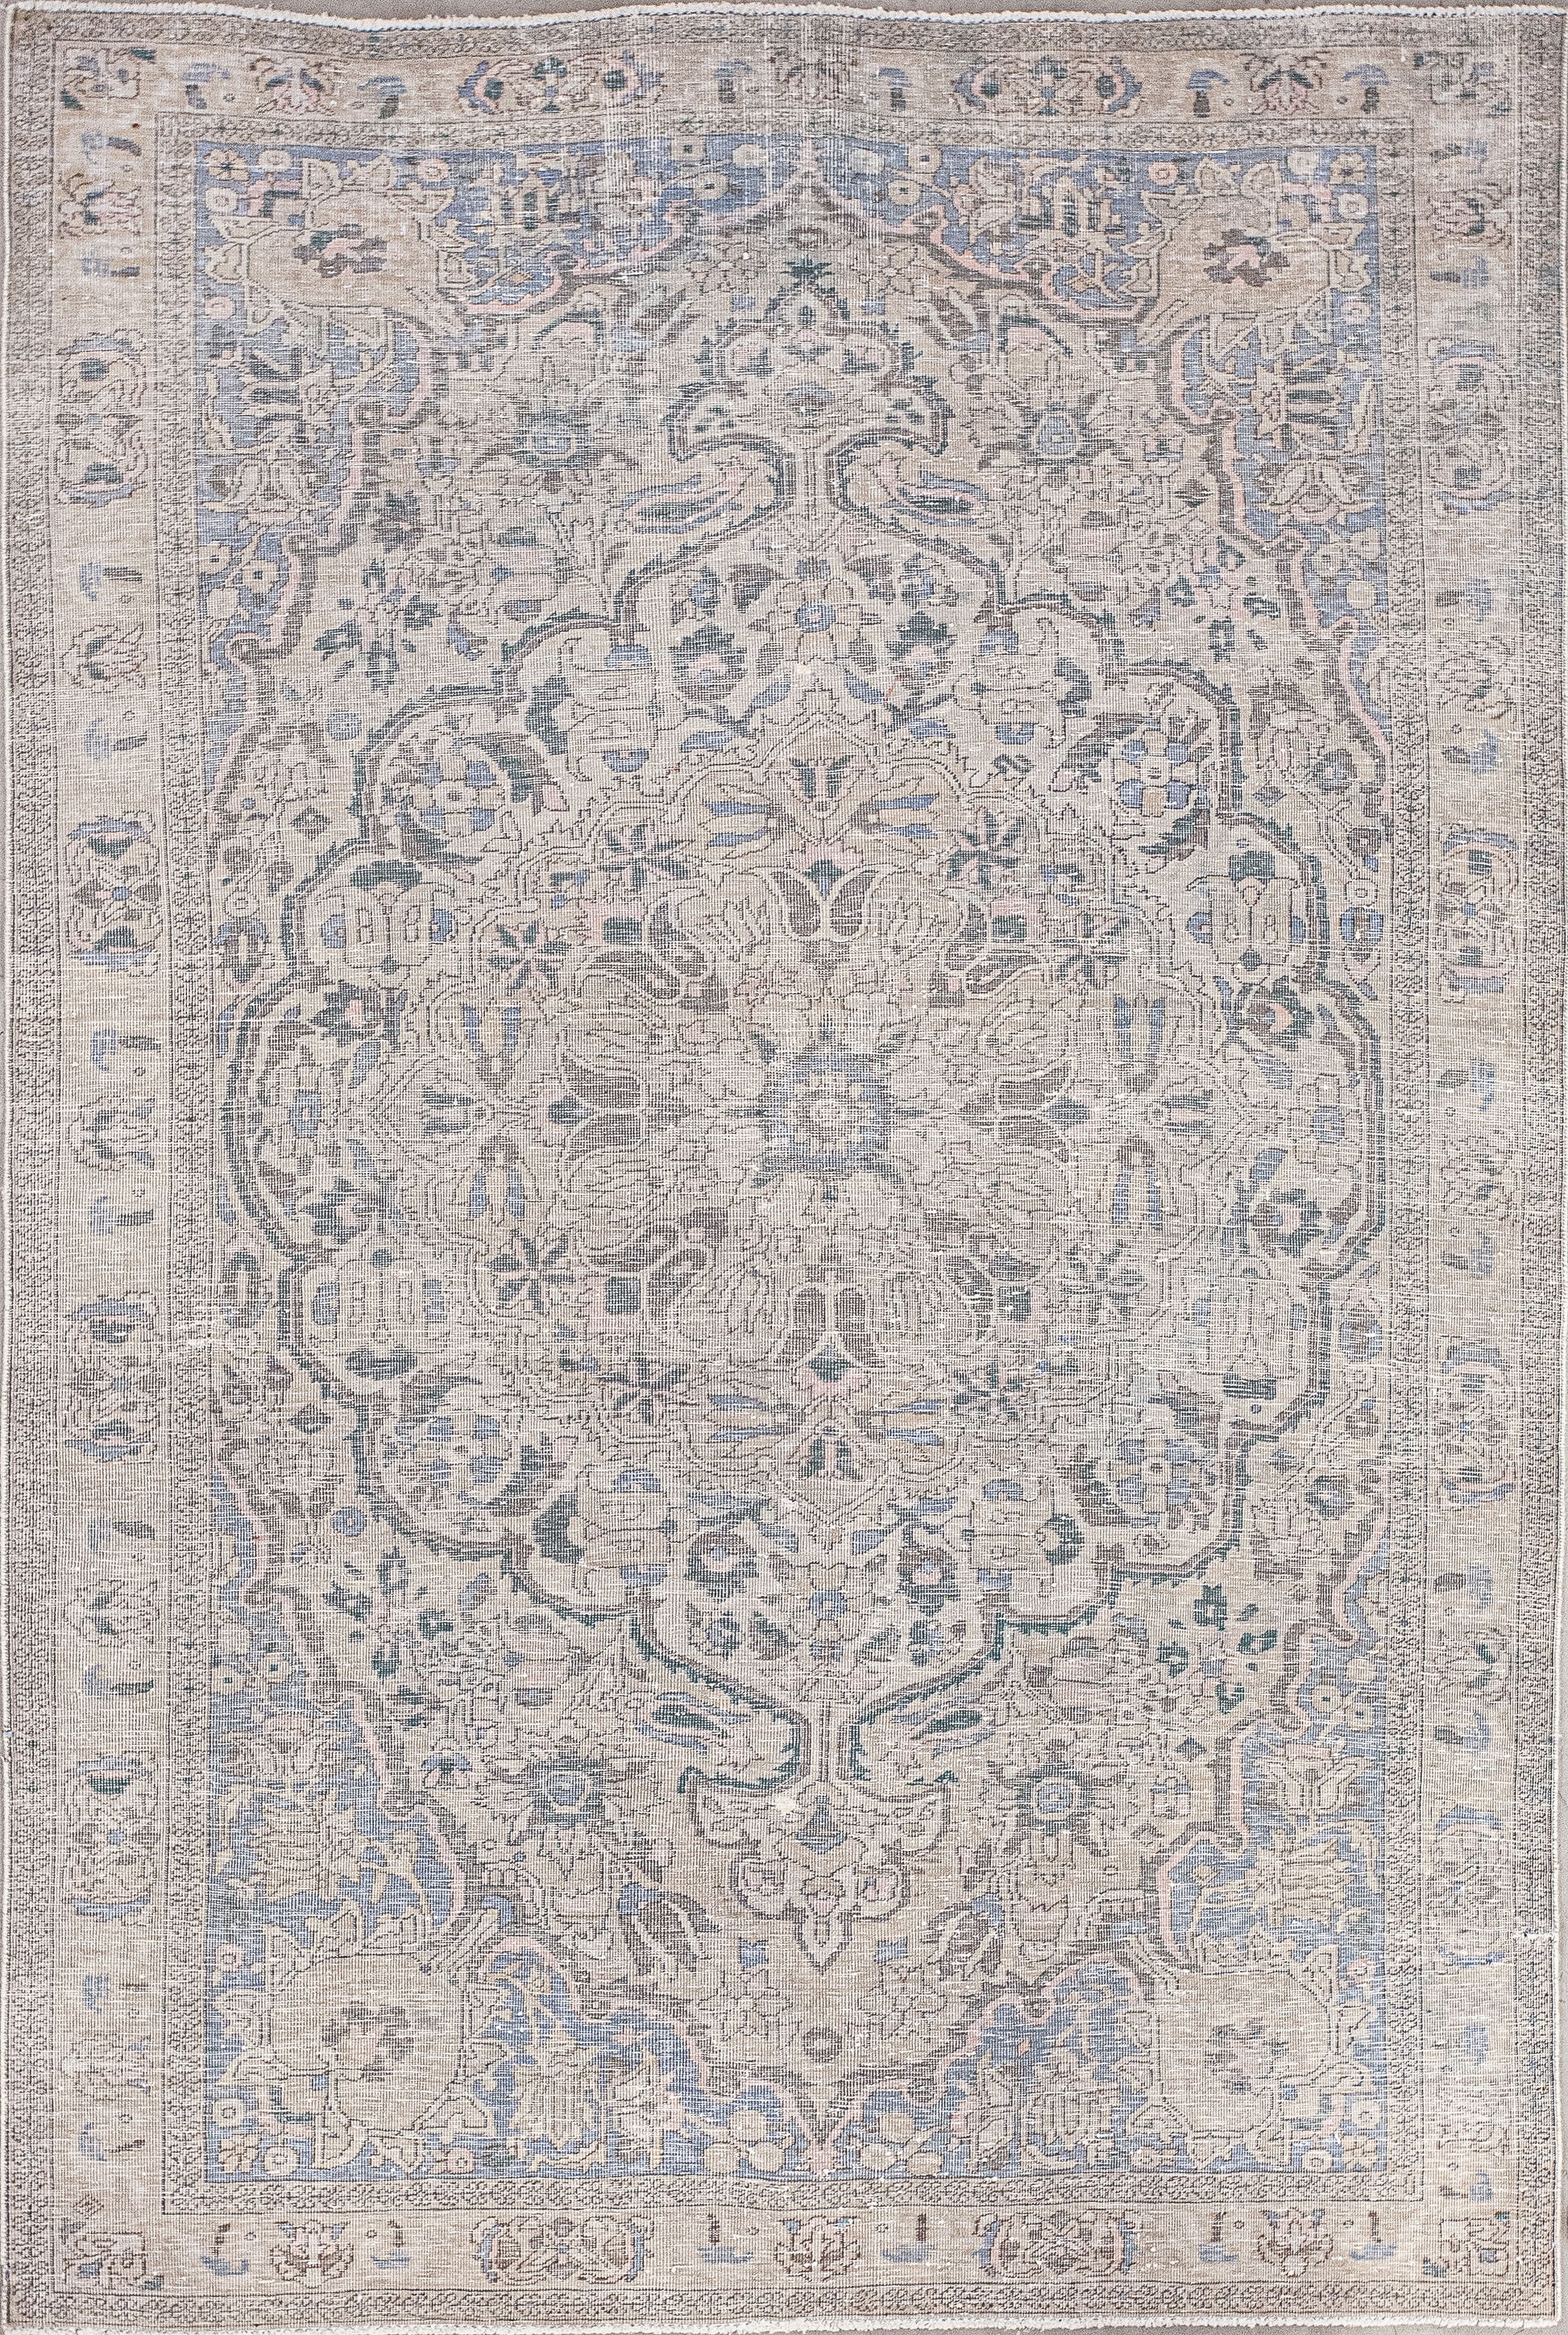 The heavily embellished rug comes with many perfectly designed details. In order to avoid an overwhelming sensation, the artisan used a simple color palette that has beige for the background, light royal blue and dark gray for accents over the pattern.